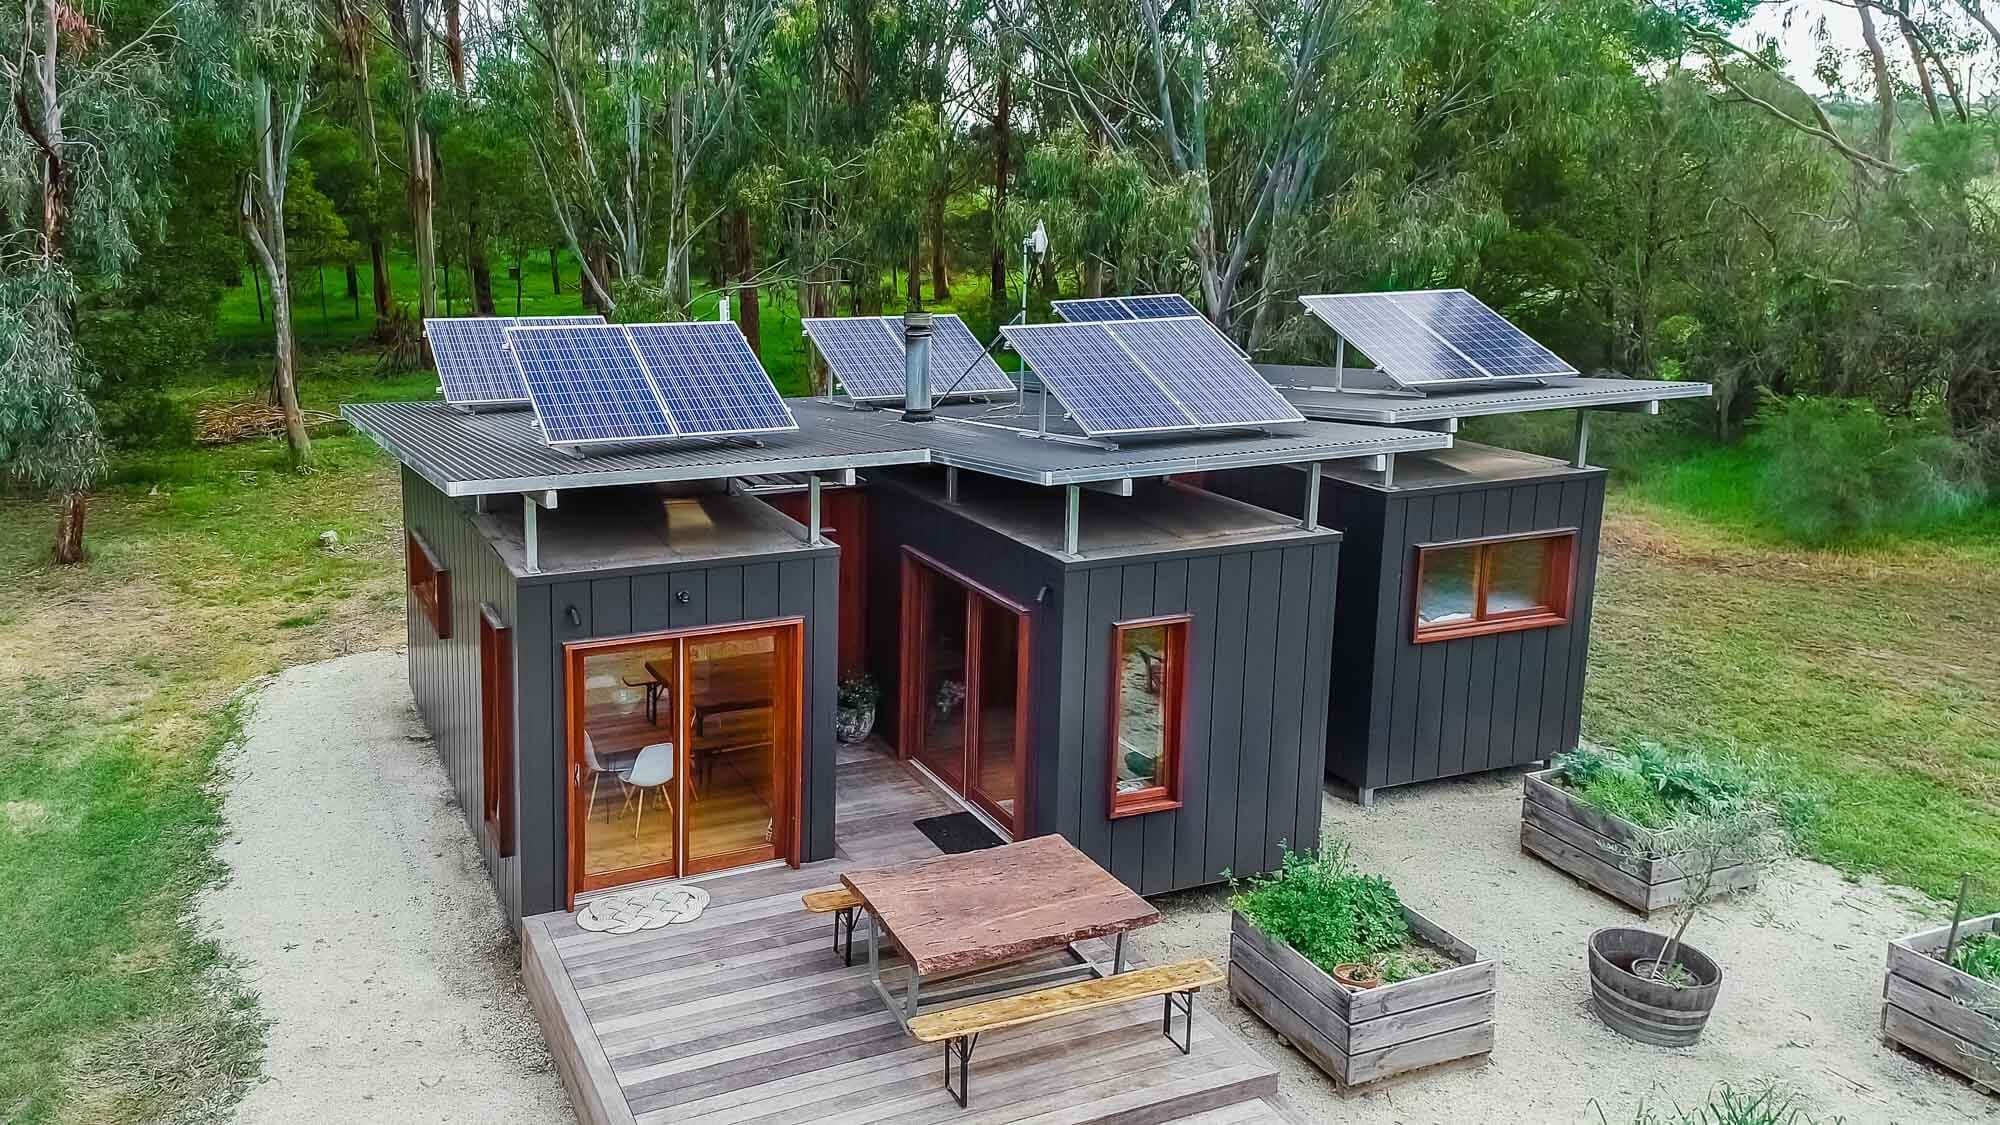 Living Big in a Tiny House - 3 x 20ft Shipping Containers Turn Into